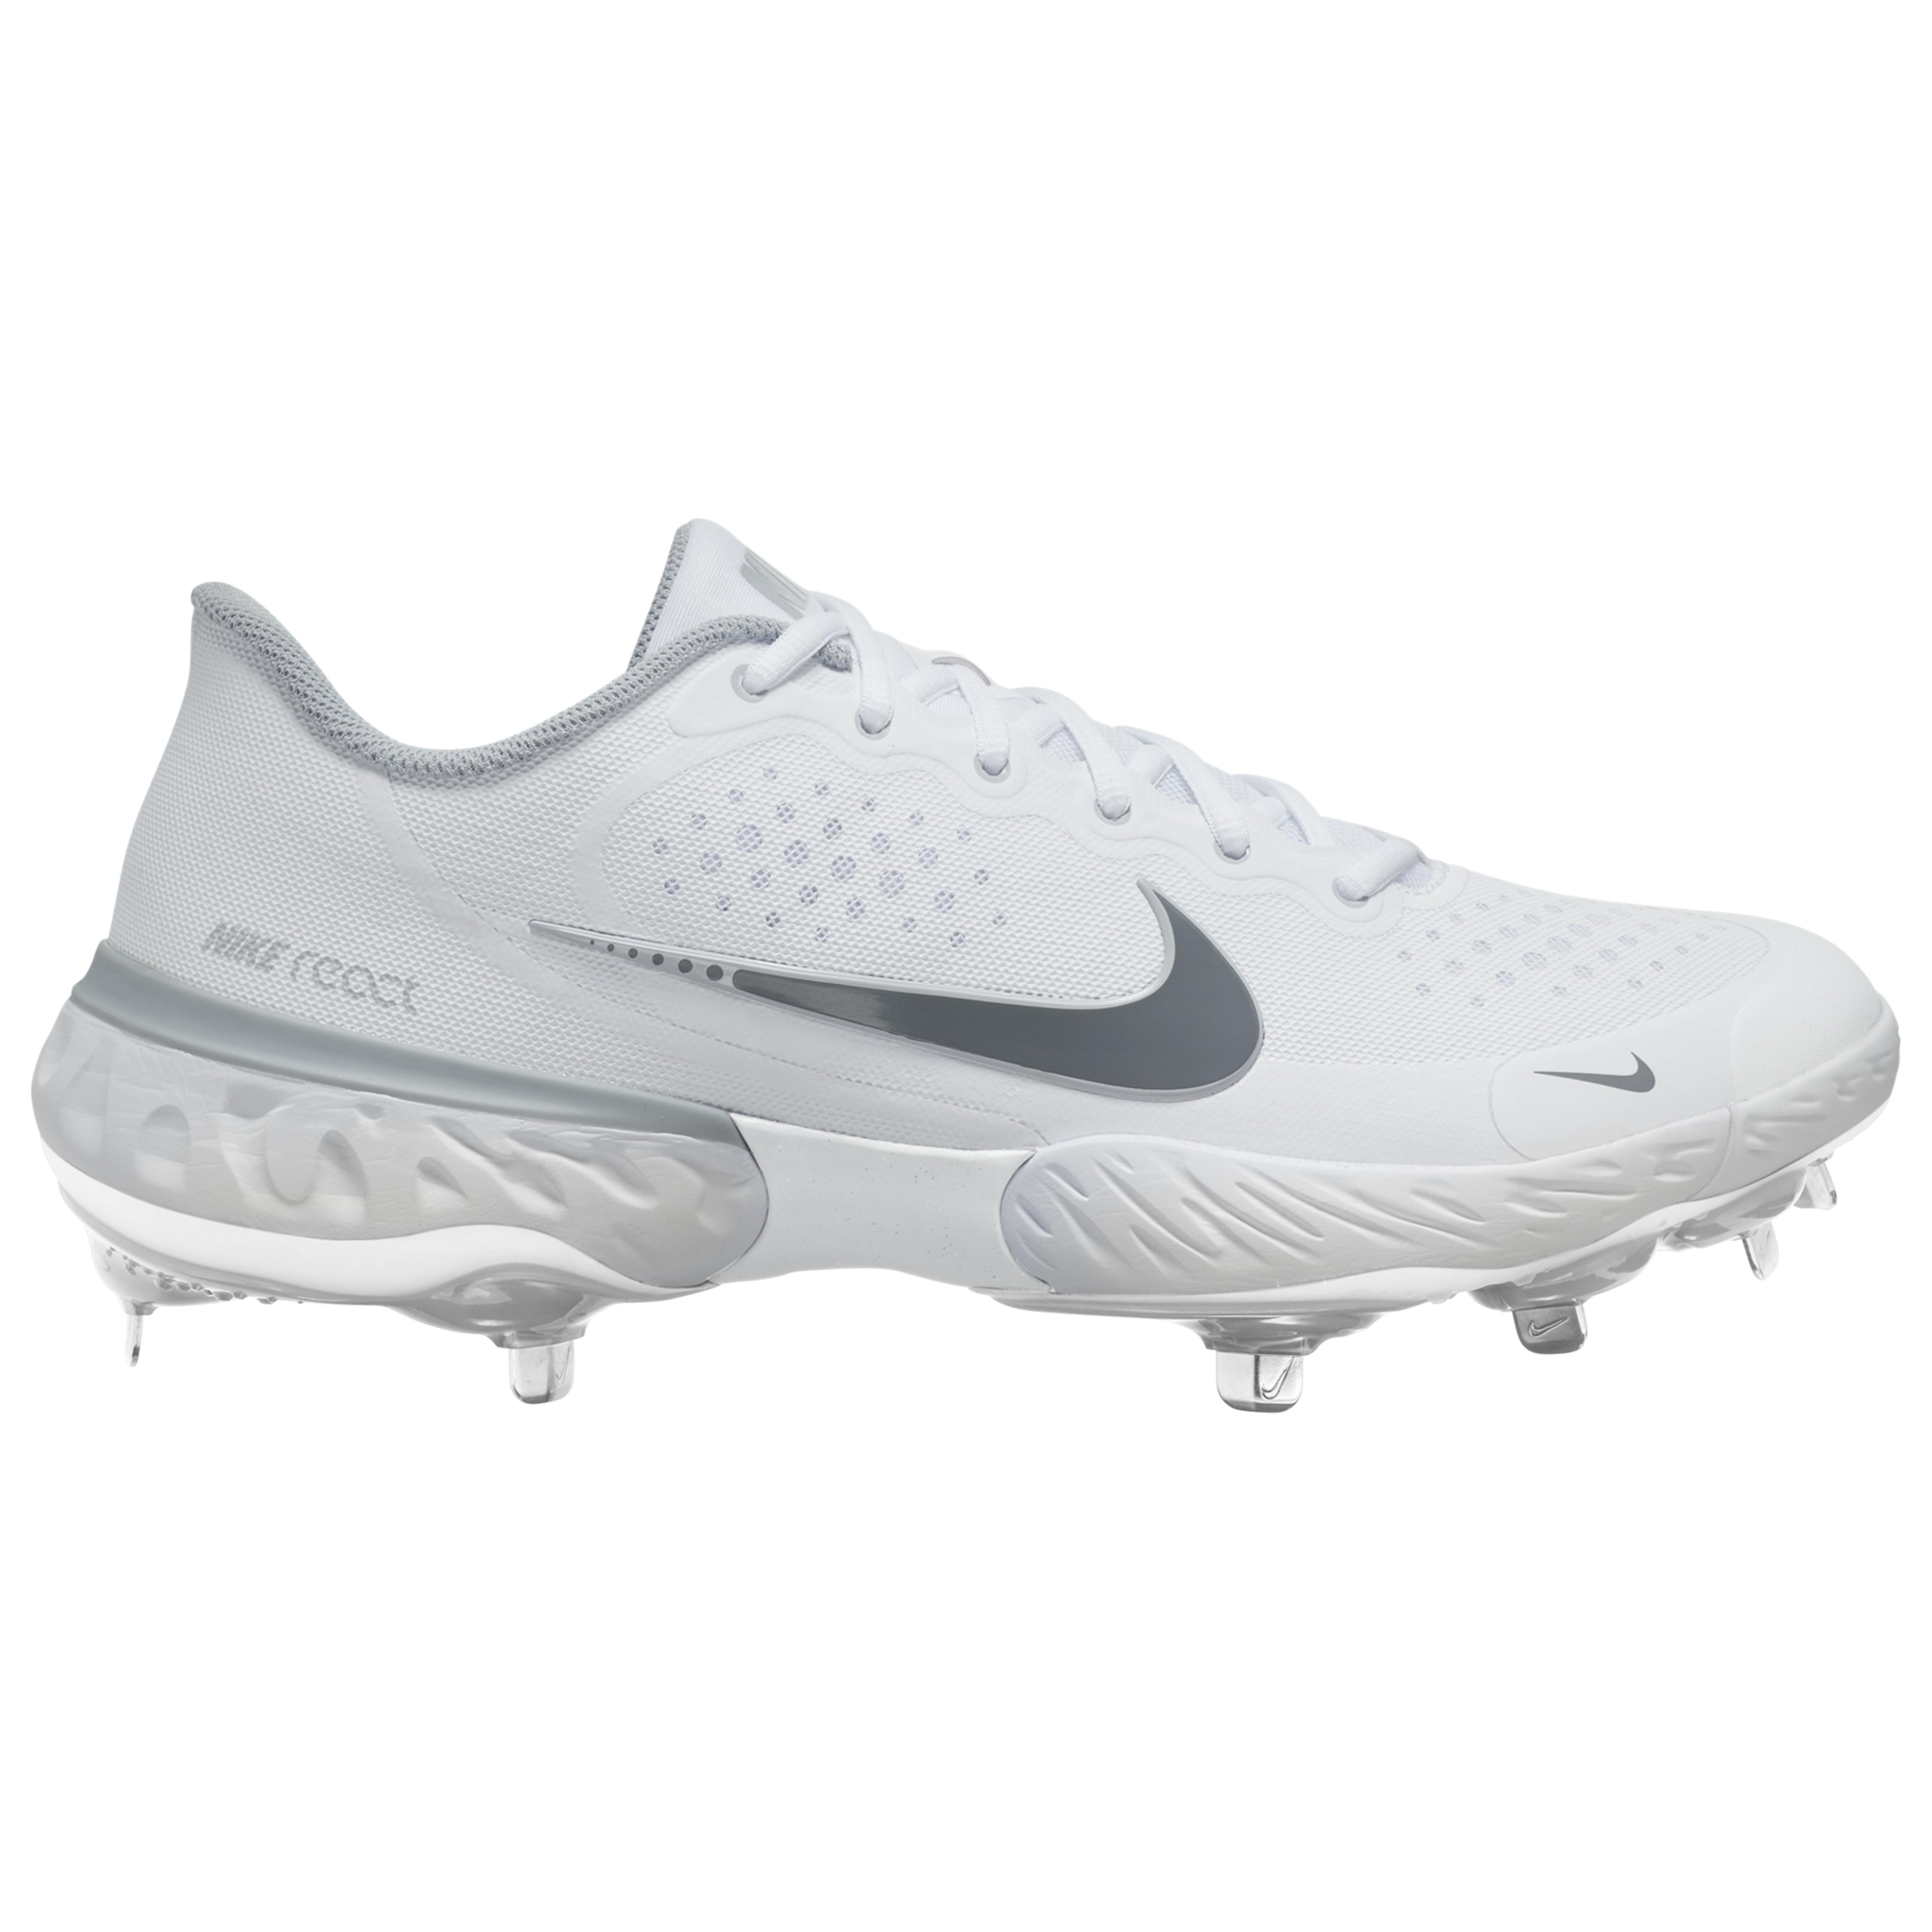 Nike Synthetic Alpha Huarache Elite 3 Low in Gray for Men - Lyst